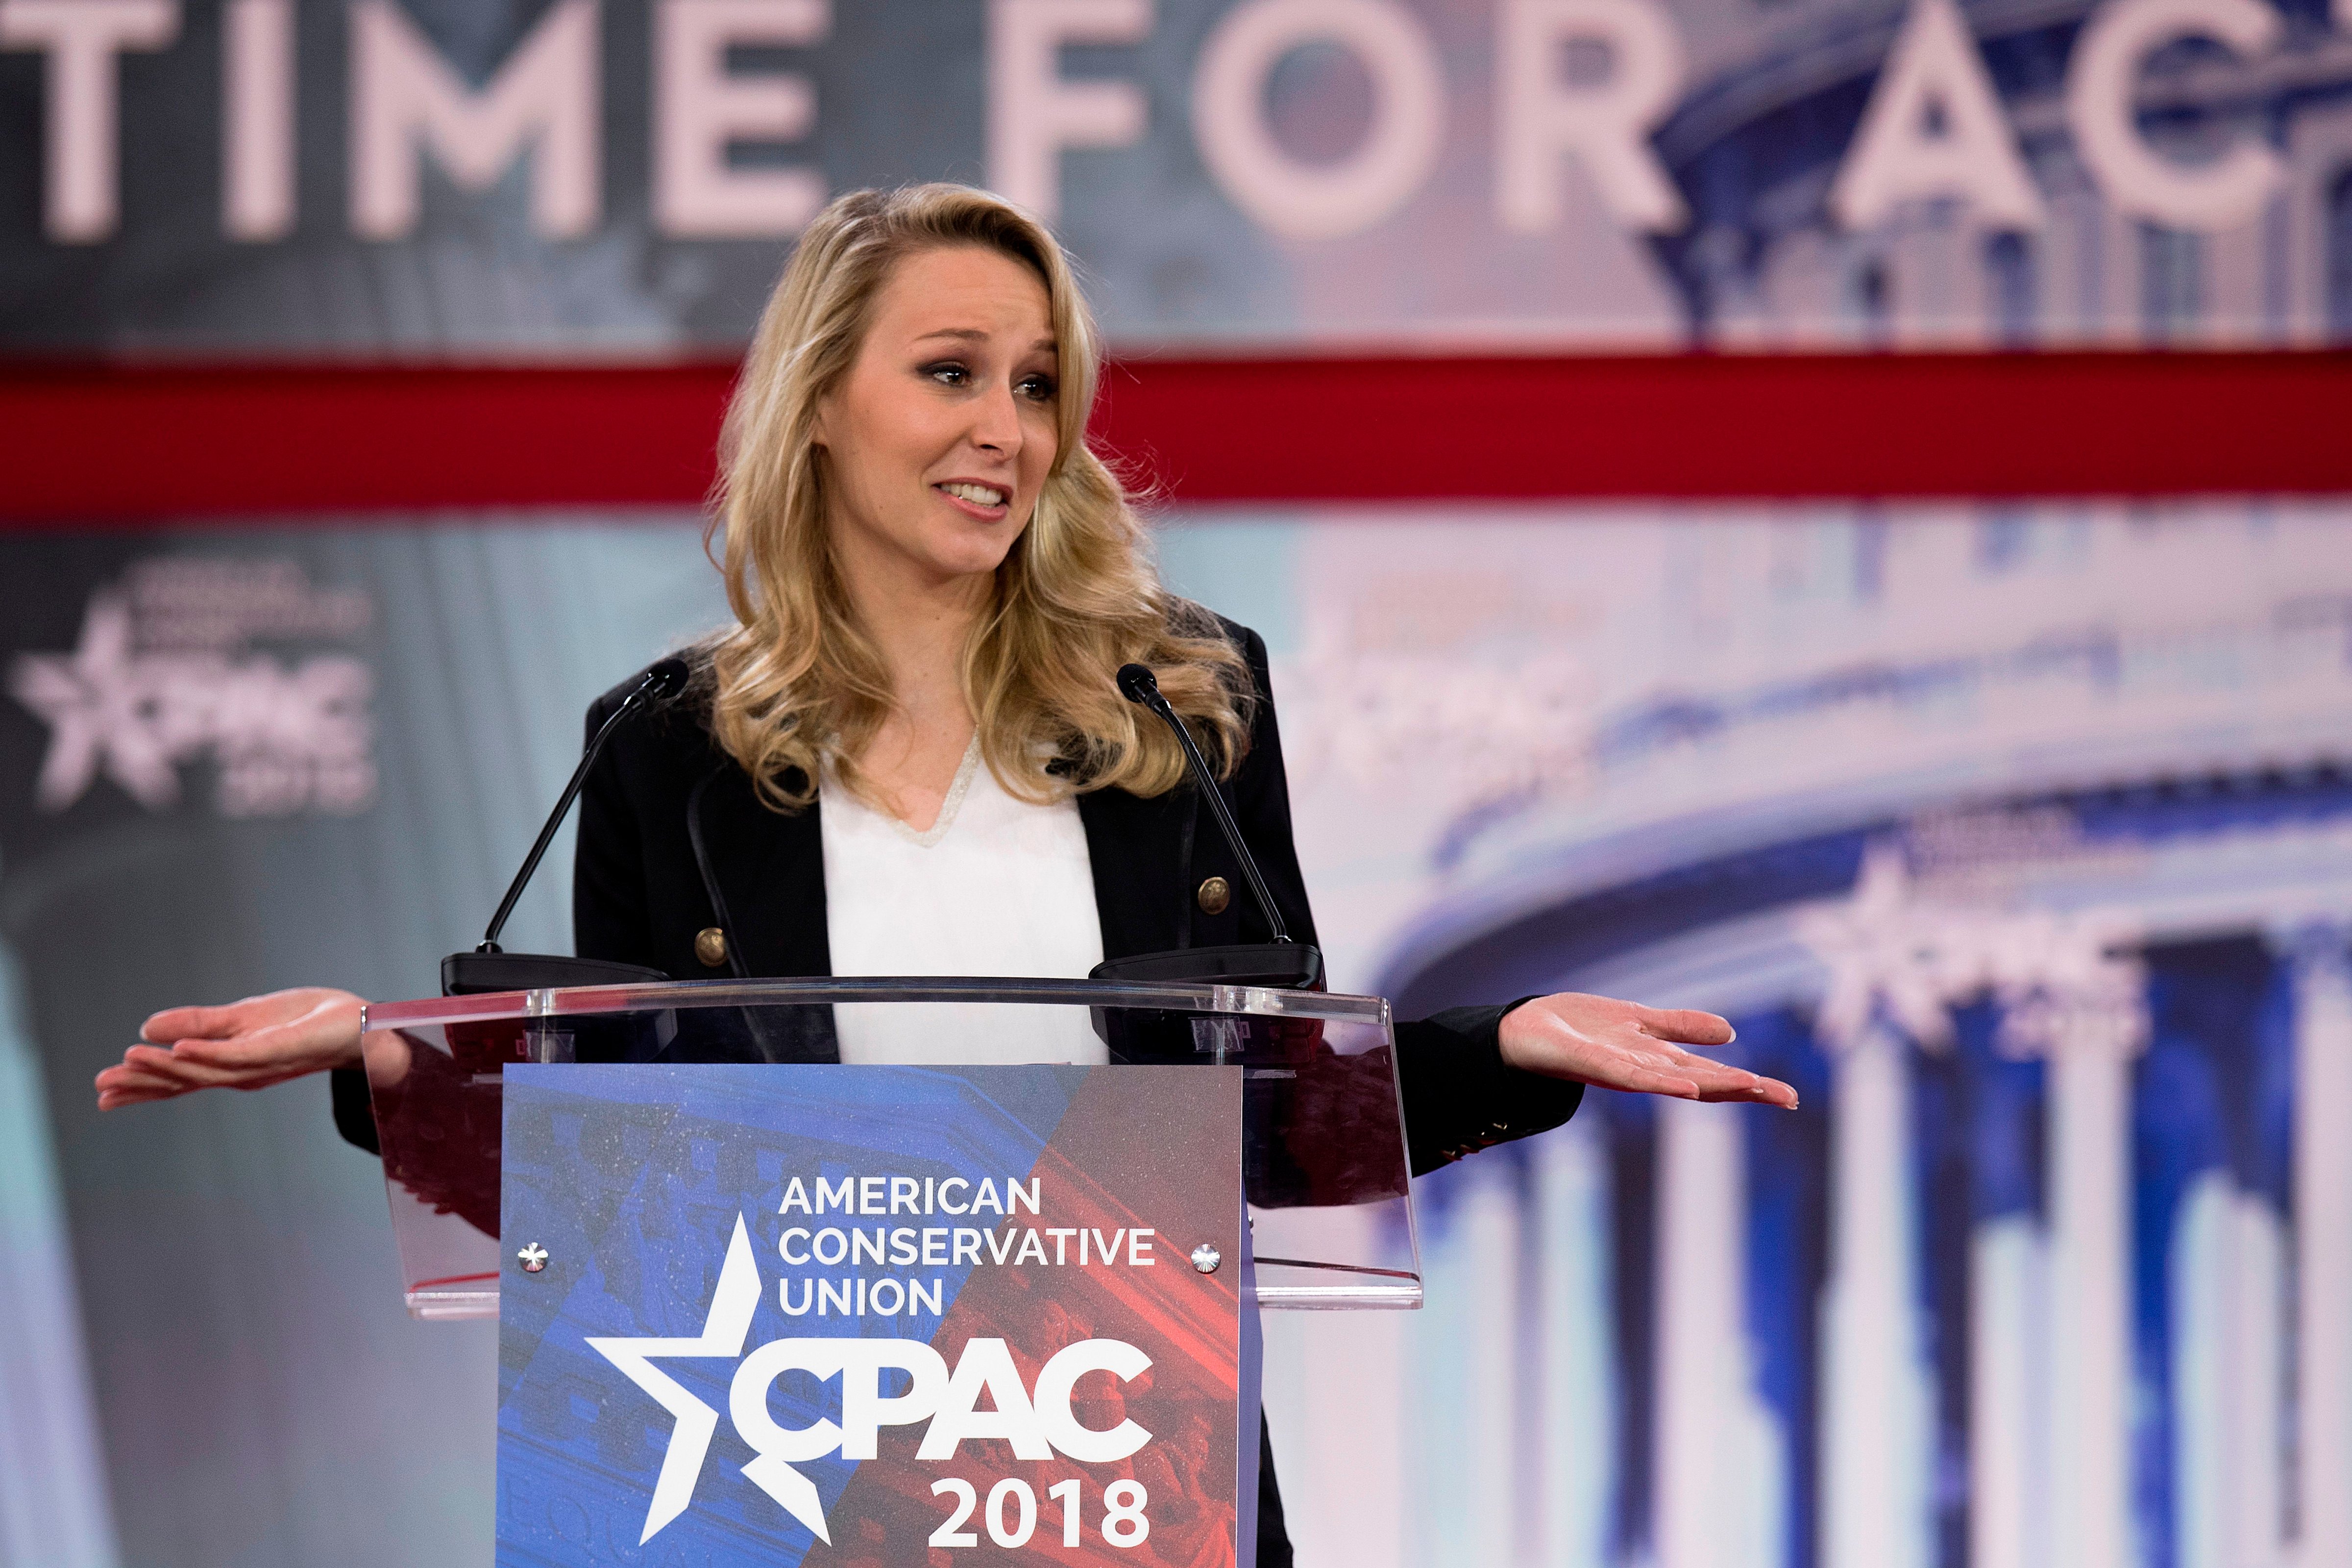 French far-right National Front (FN) party former member of parliament Marion Marechal-Le Pen speaks during the 2018 Conservative Political Action Conference in Oxen Hill, Maryland, on February 22, 2018 (JIM WATSON - AFP/Getty Images)